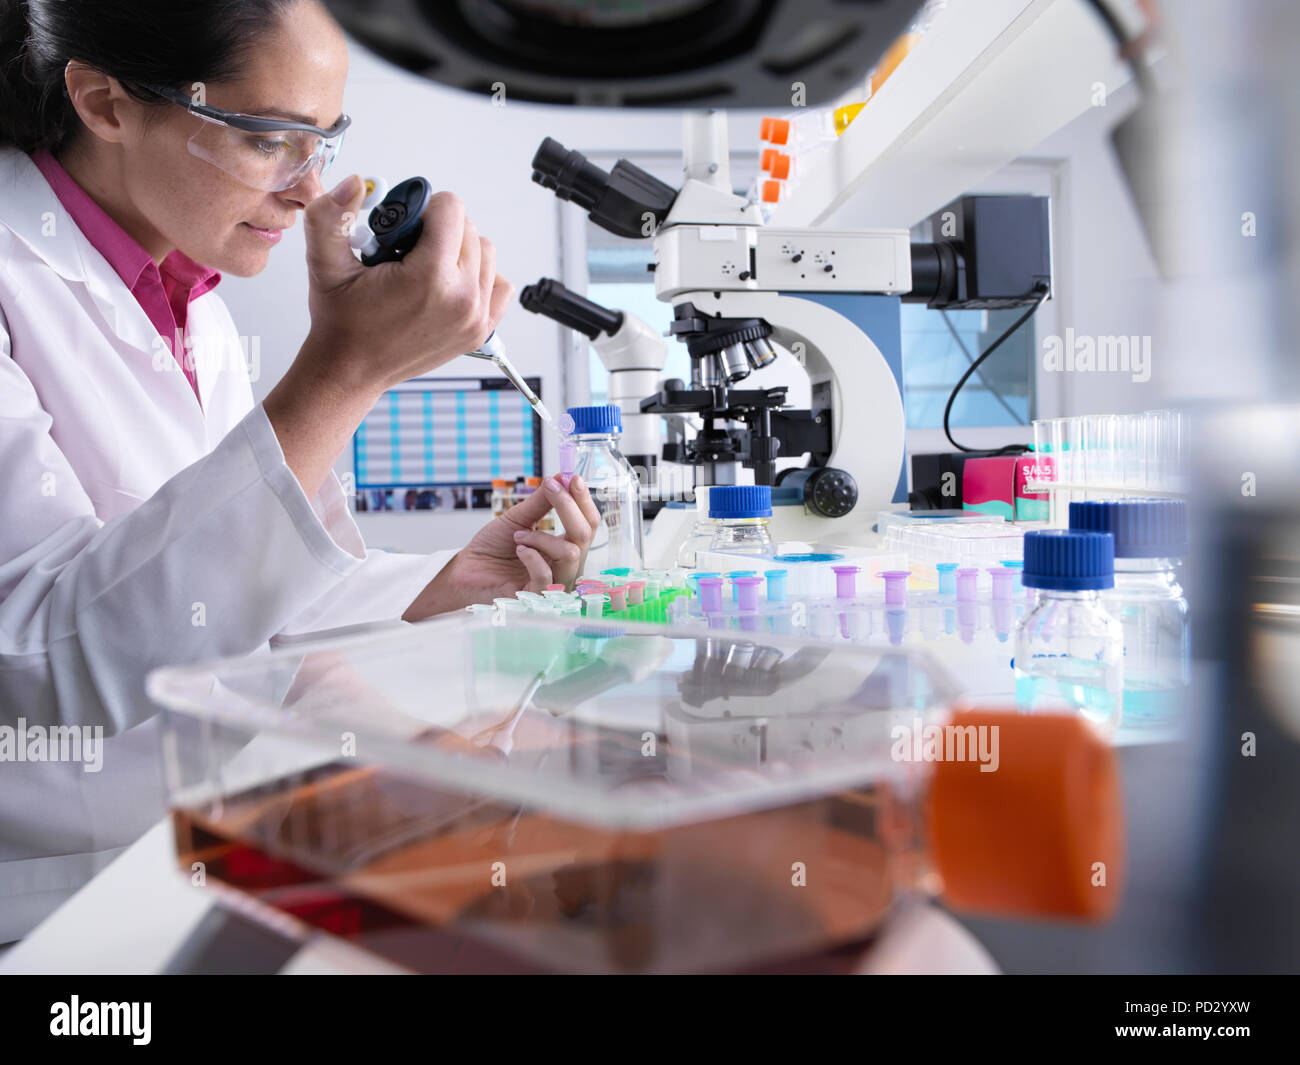 Scientist pipetting sample into vial during experiment, ready for testing with a flask containing cells in the foreground Stock Photo